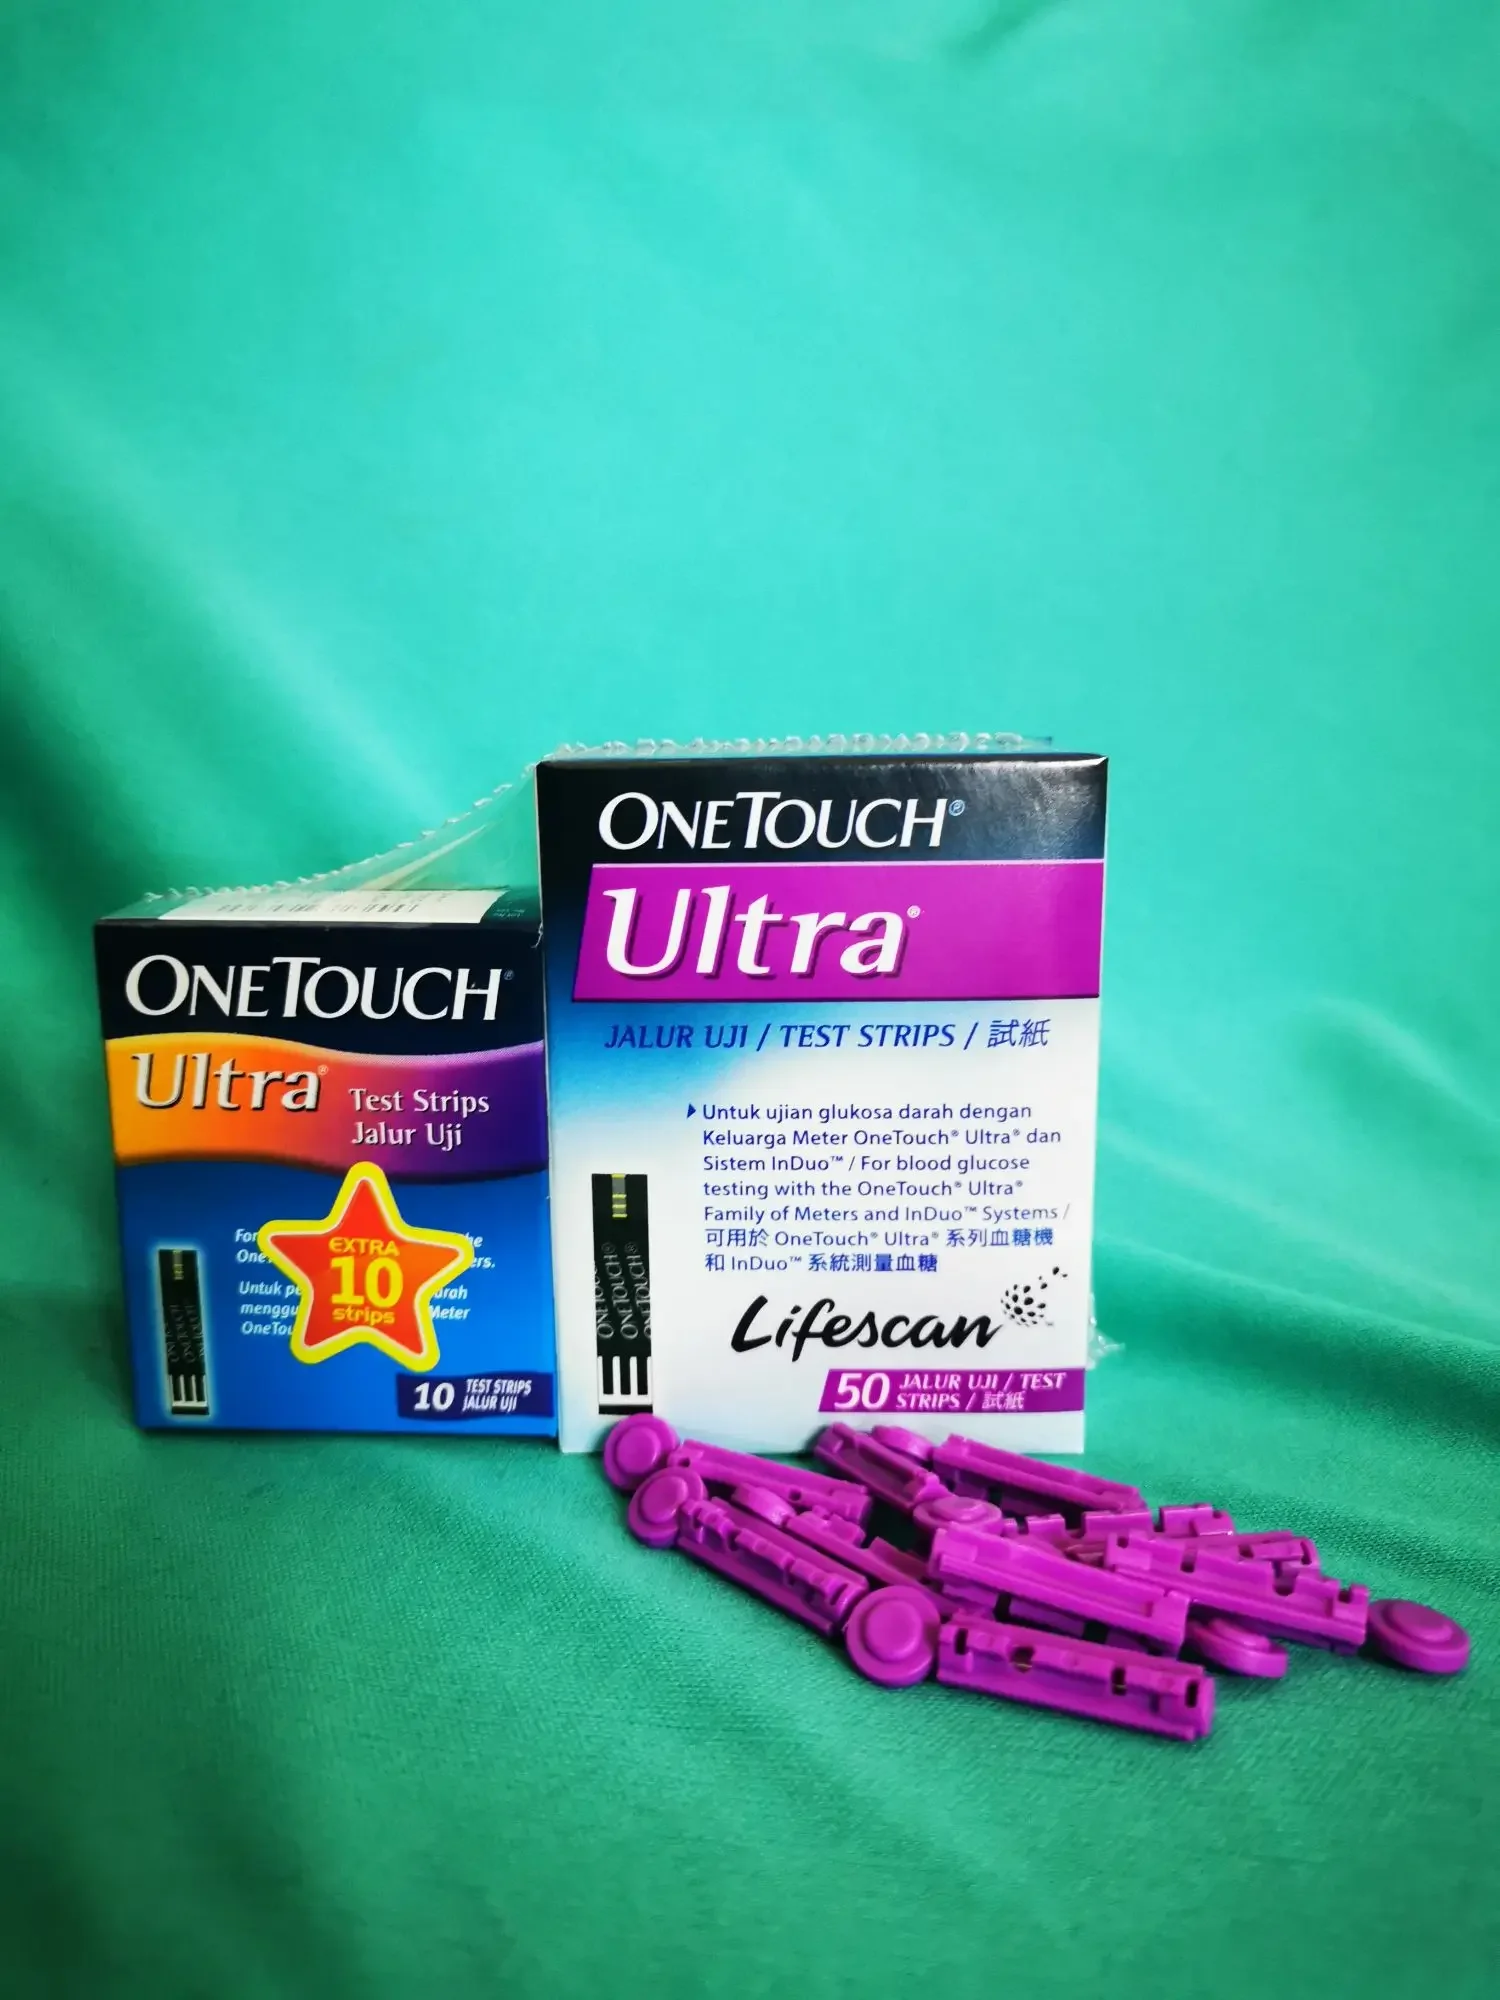 One Touch Ultra Test Strips 50's + 10's FOC 10 Blood Lancet (Round) Exp 01/22